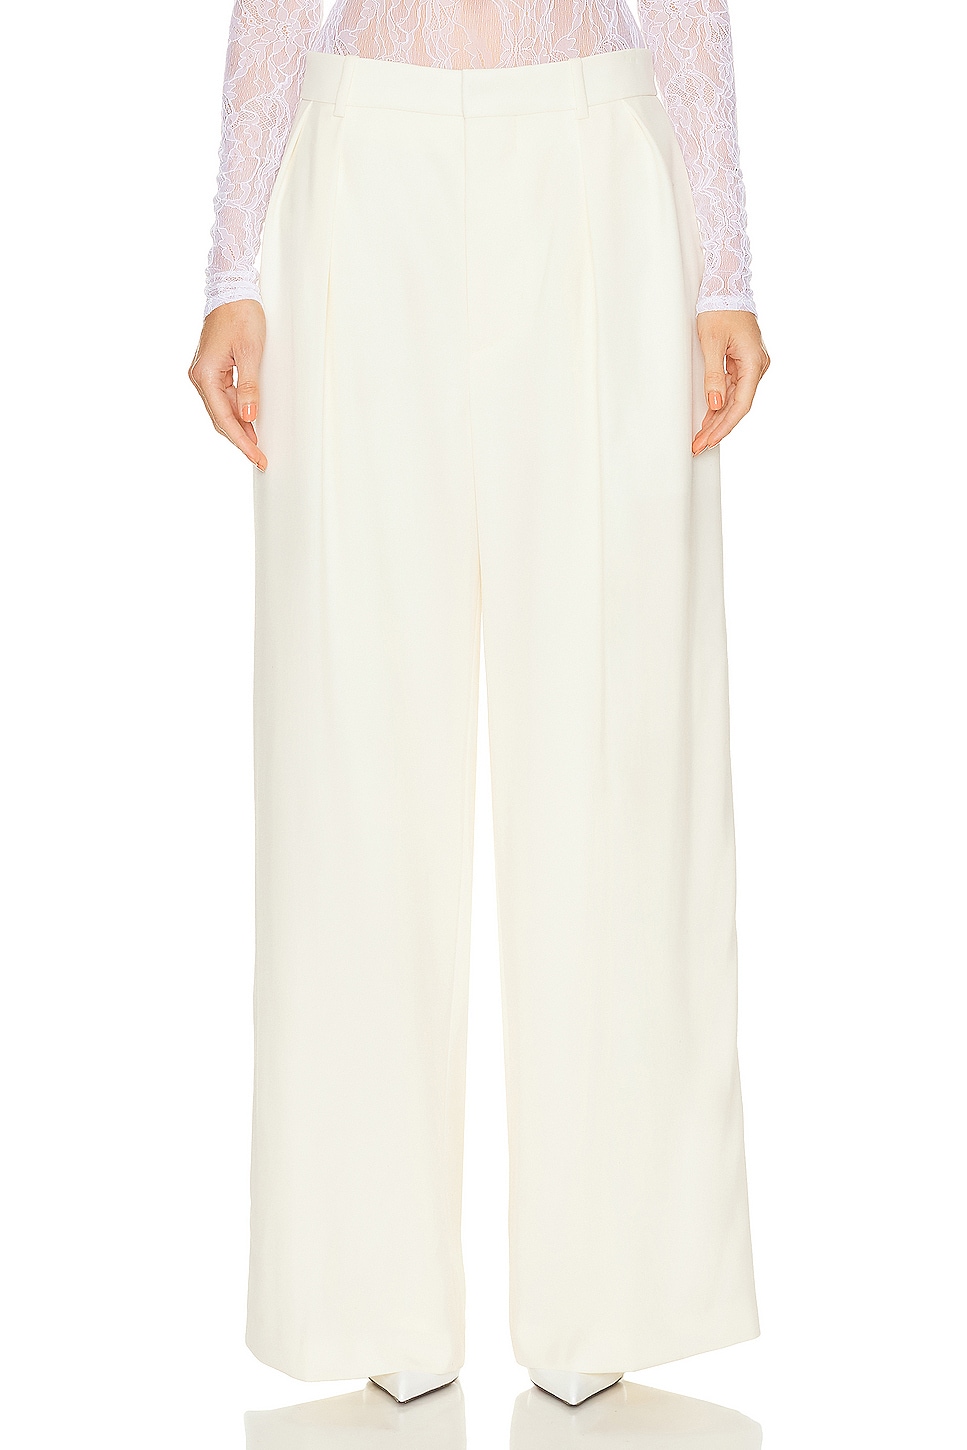 Image 1 of WARDROBE.NYC Evening Trouser in Off White